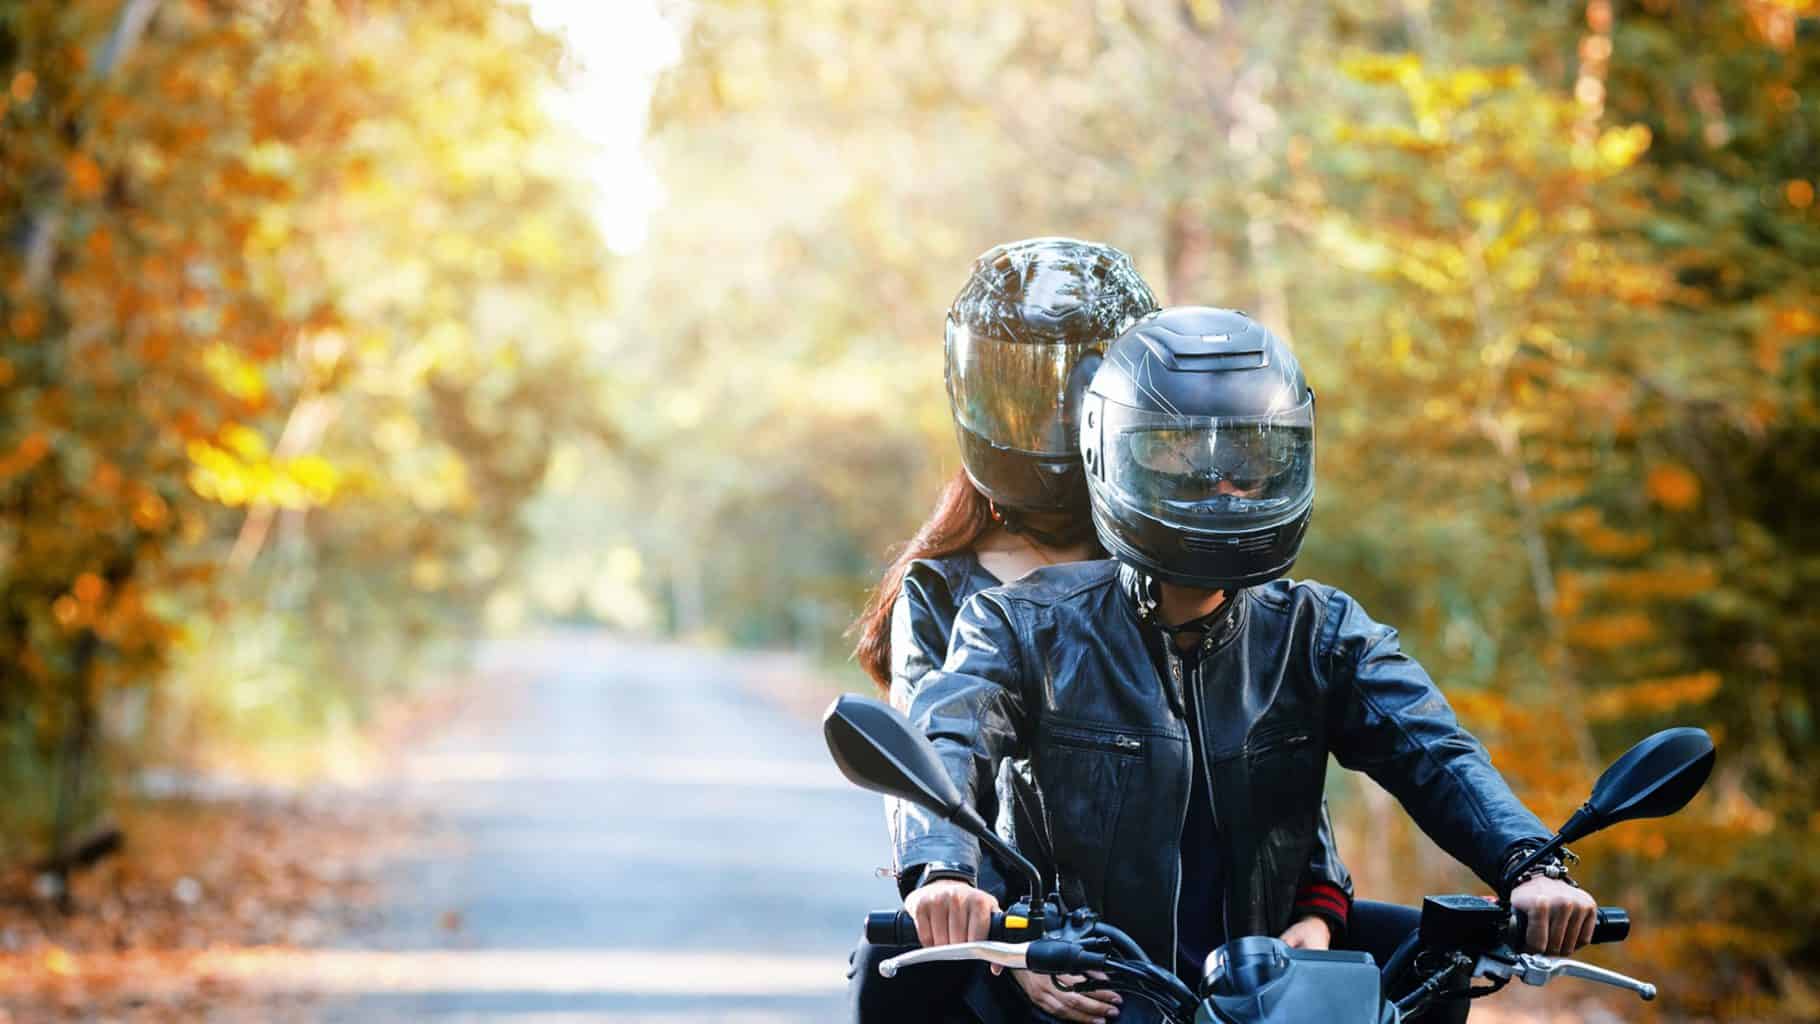 Two people with helmets on motorcyle